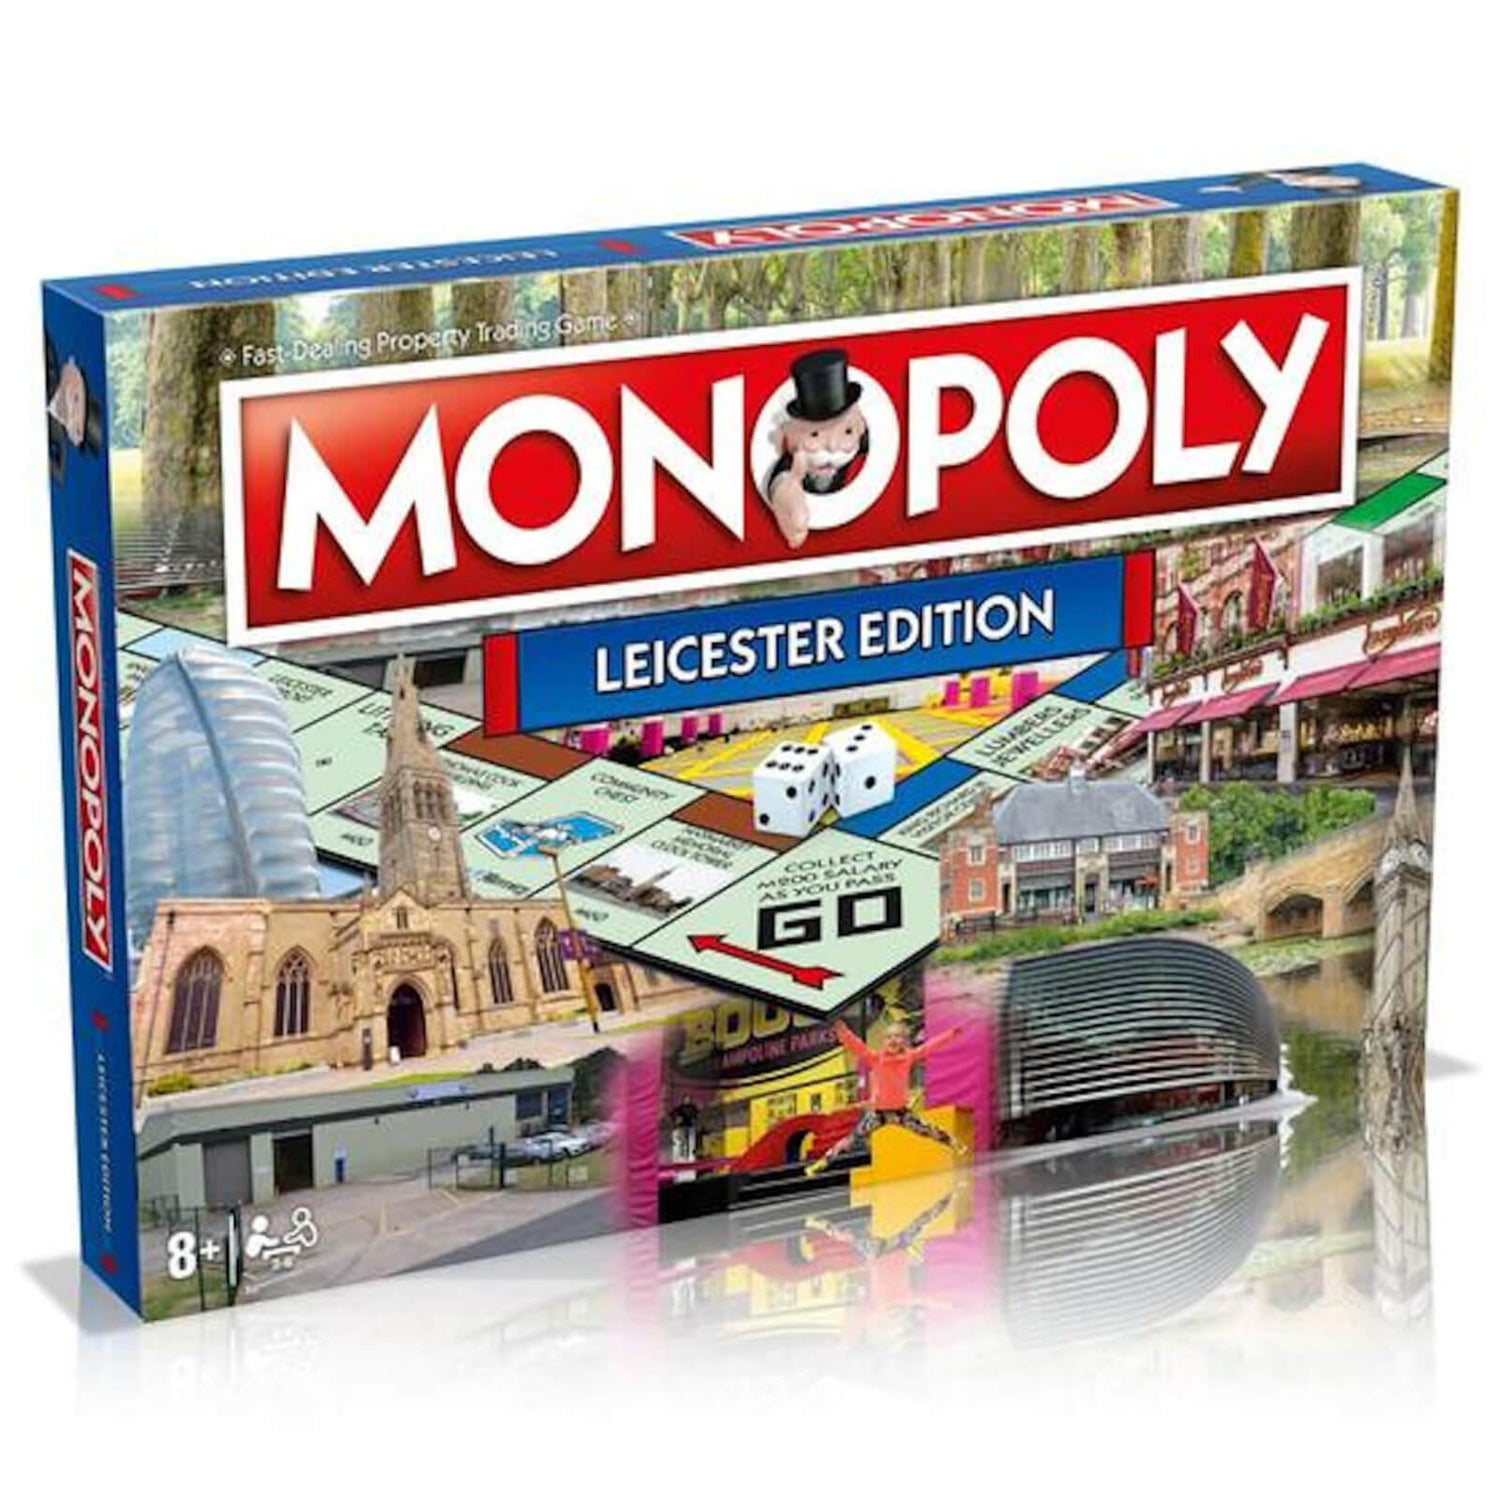 Monopoly Board Game - Leicester Edition